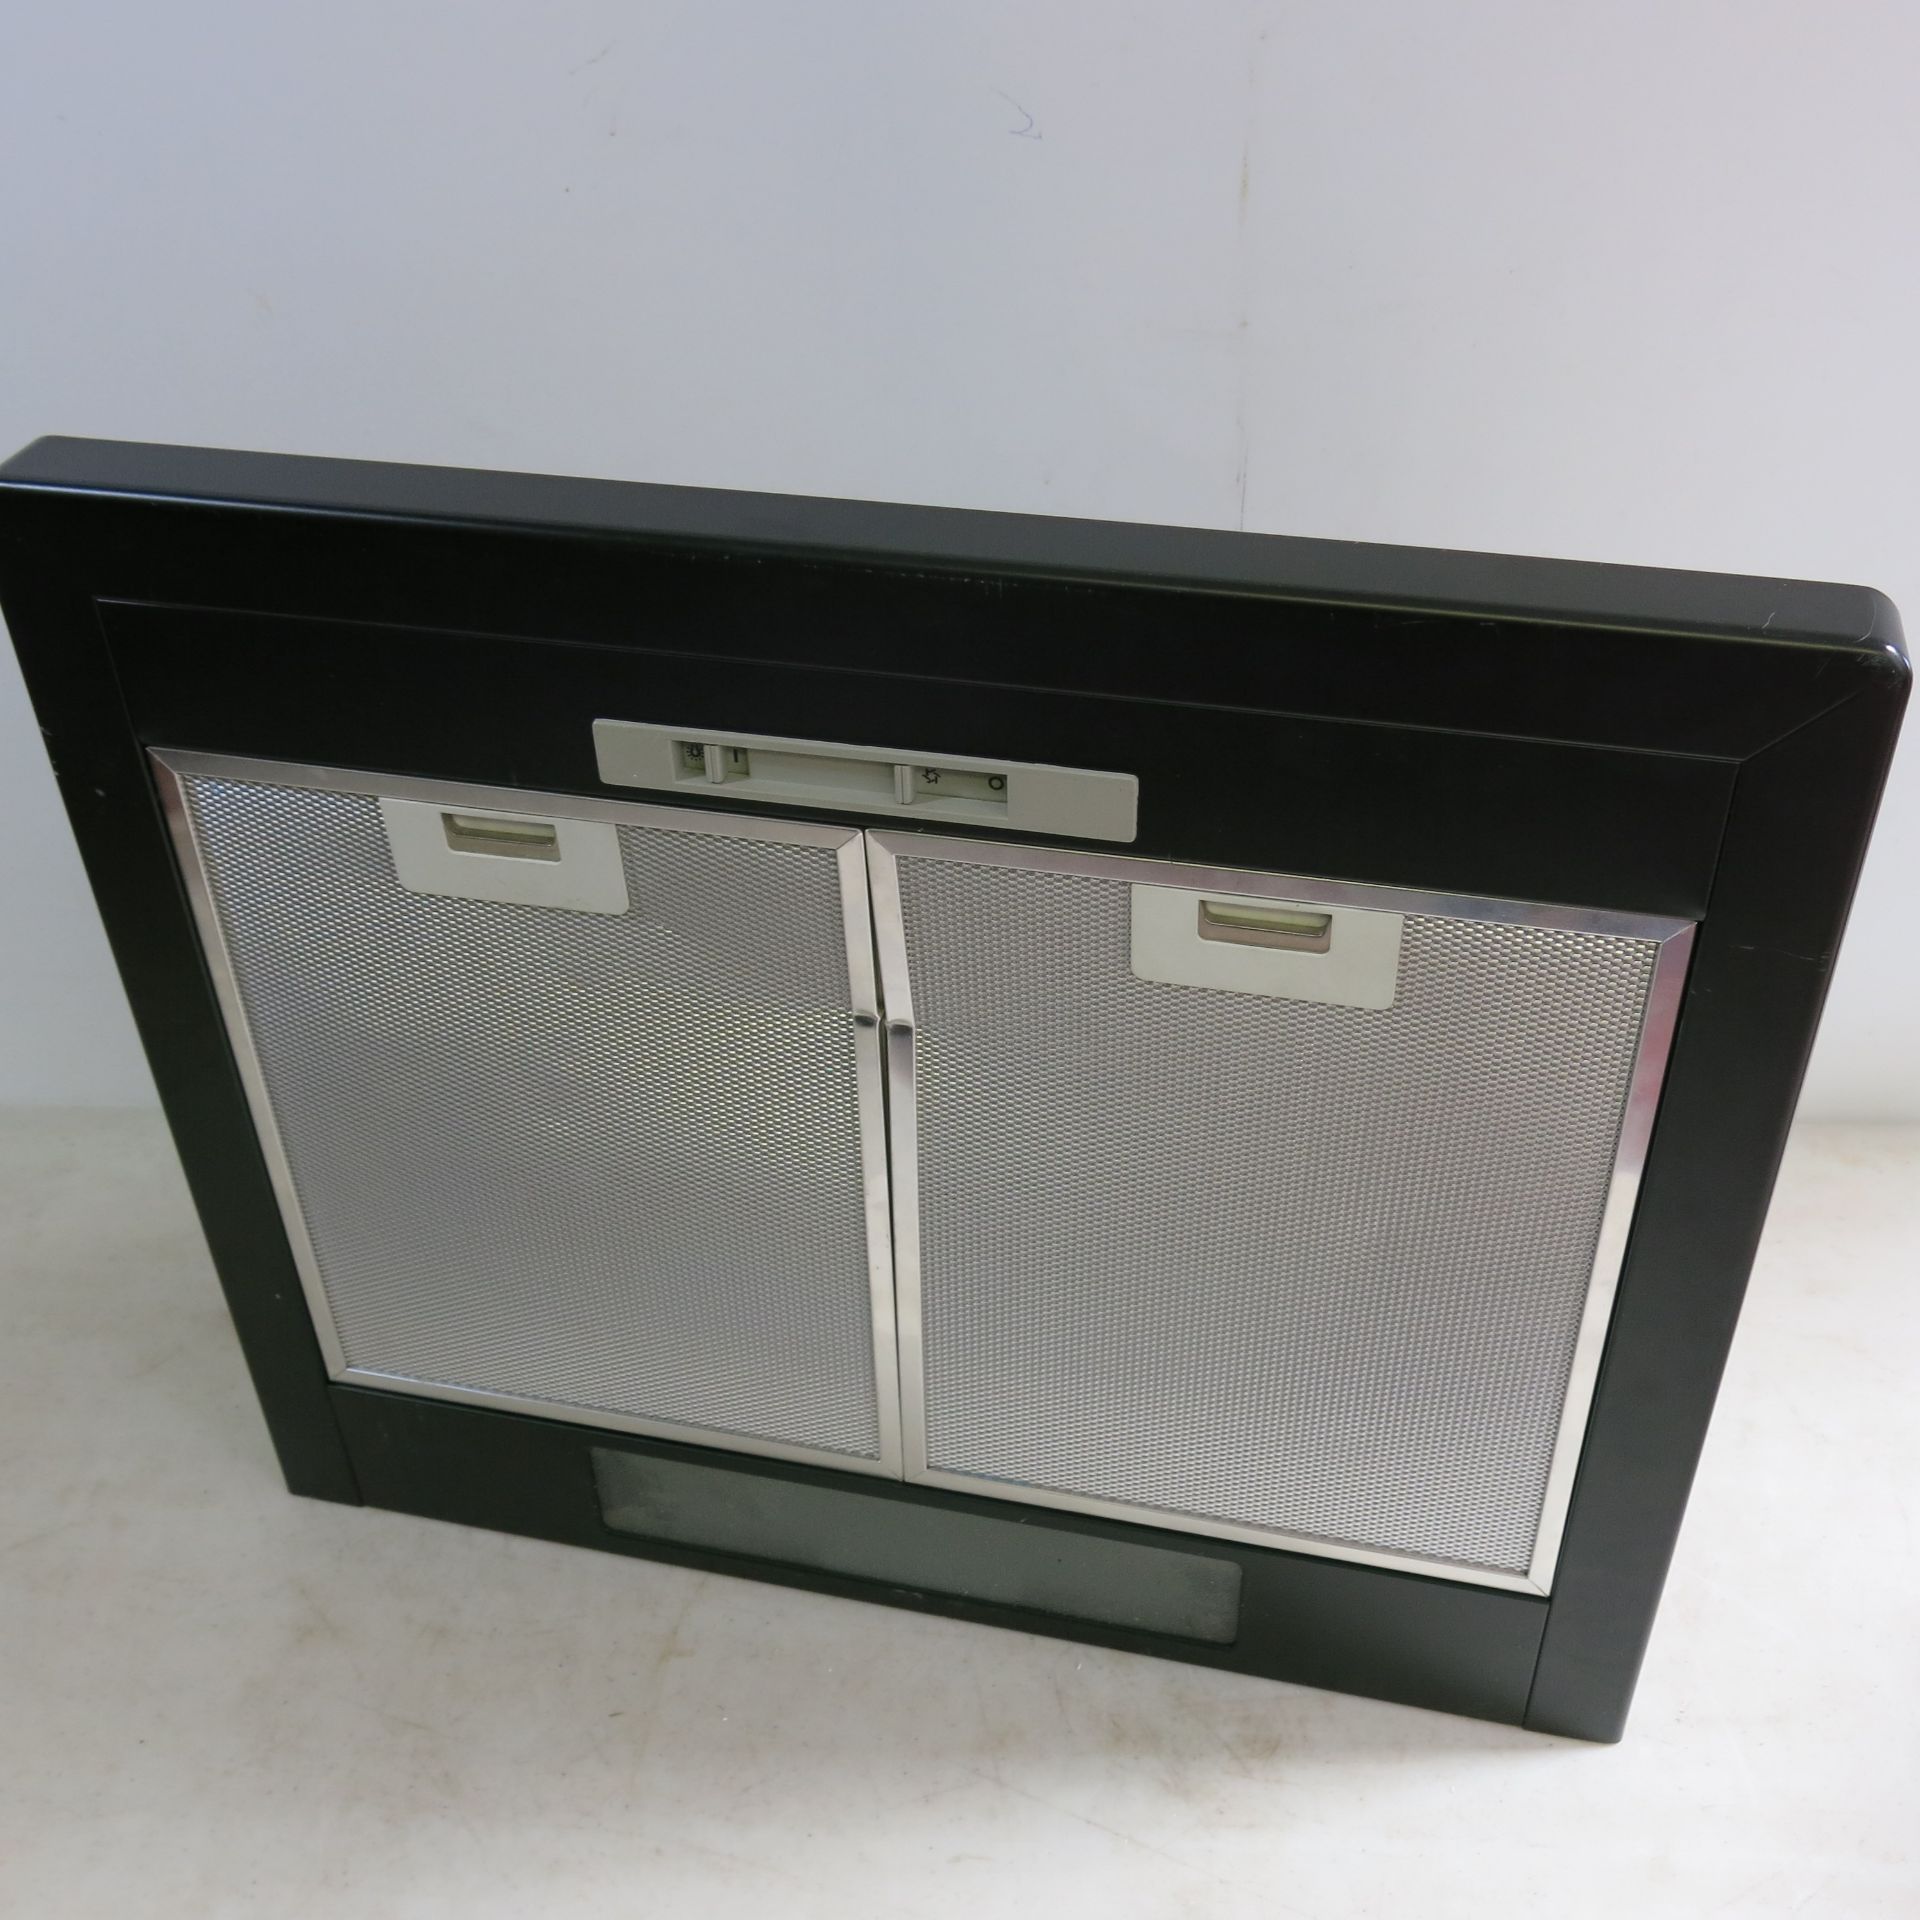 Baumatic 60cm Black Extractor Cooker Hood, Model FCC/2002. Damage to Filters, Ex Display/As Viewed. - Image 3 of 5